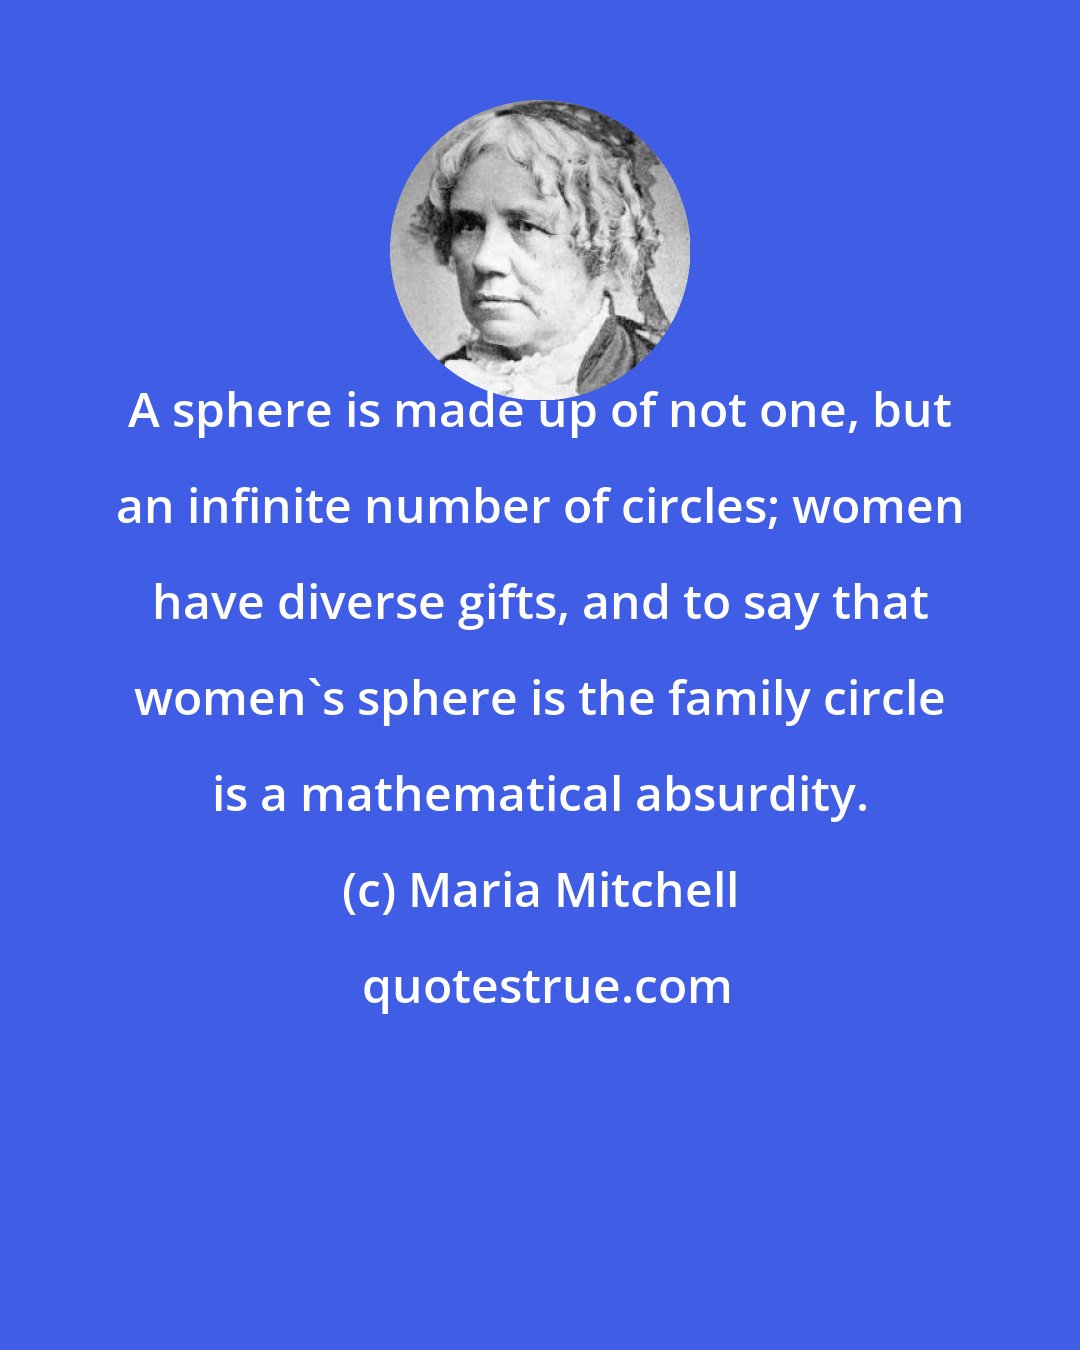 Maria Mitchell: A sphere is made up of not one, but an infinite number of circles; women have diverse gifts, and to say that women's sphere is the family circle is a mathematical absurdity.